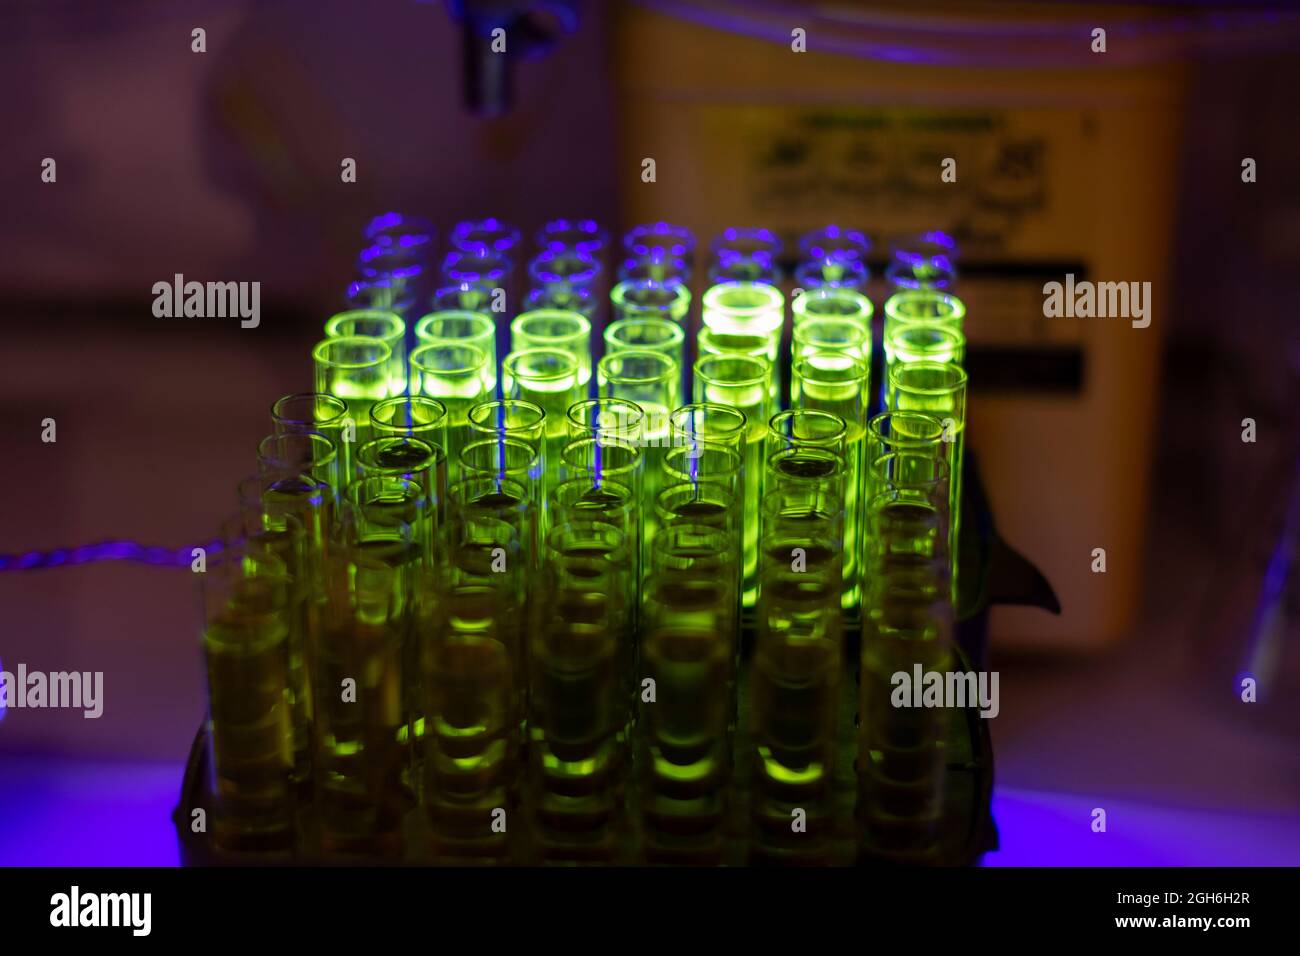 Glowing fluorescent compound collected from column chromatography in multiple test tube in a chemistry laboratory for pharmaceutical research Stock Photo